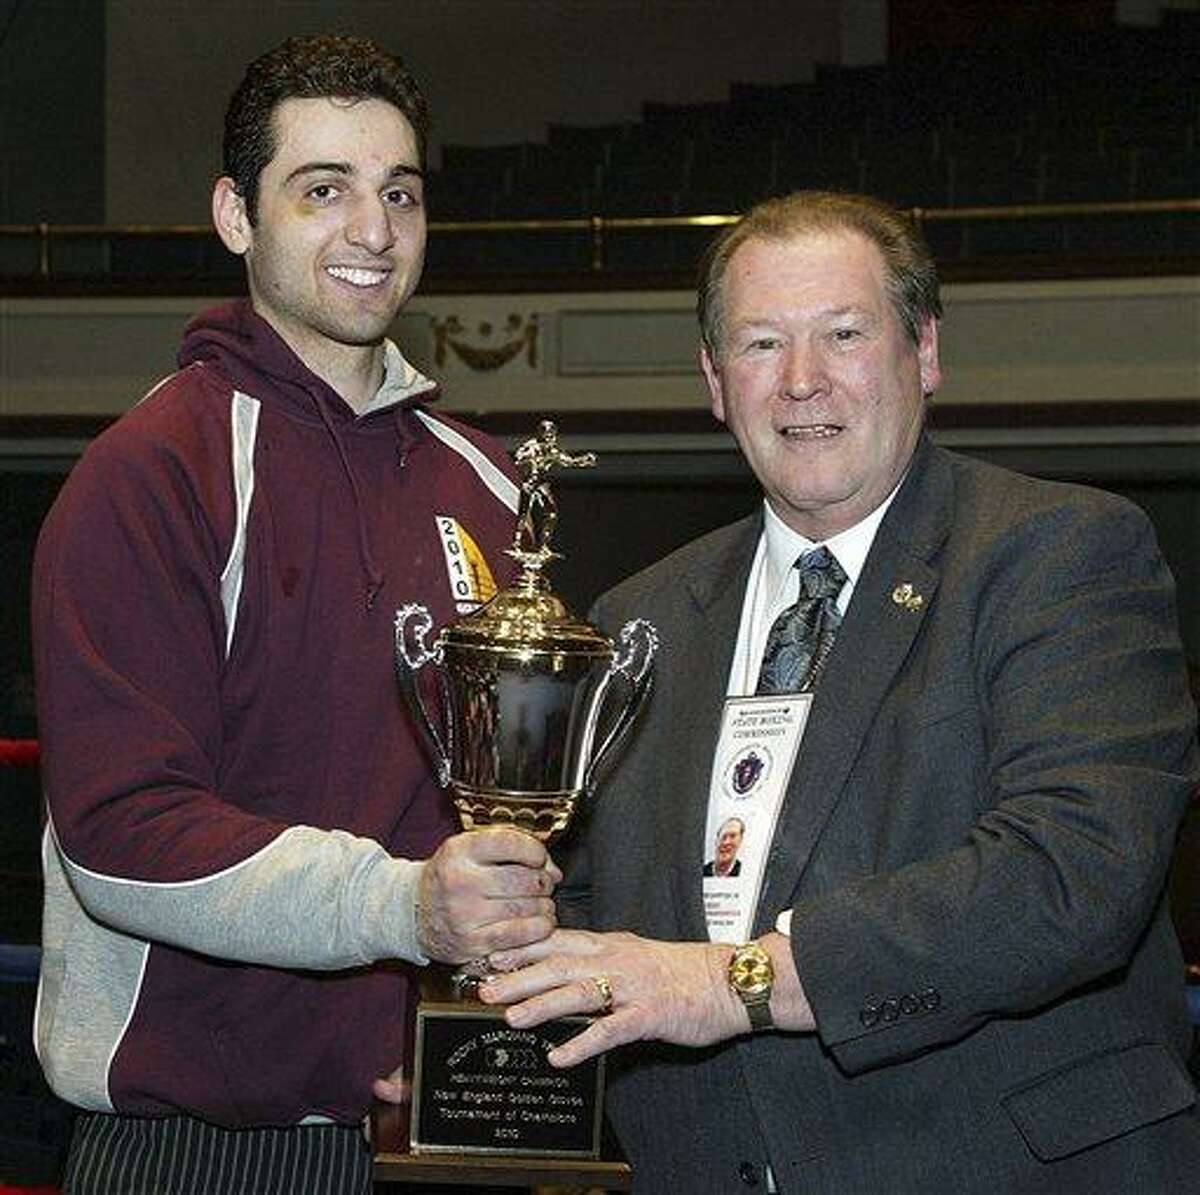 In this Feb. 17, 2010, photo, Tamerlan Tsarnaev, left, accepts the trophy for winning the 2010 New England Golden Gloves Championship from Dr. Joseph Downes, right, in Lowell, Mass. Tsarnaev, 26, who had been known to the FBI as Suspect No. 1 in the Boston Marathon Explosions and was seen in surveillance footage in a black baseball cap, was killed overnight on Friday, April 19, 2013, officials said. (AP Photo/The Lowell Sun, Julia Malakie)